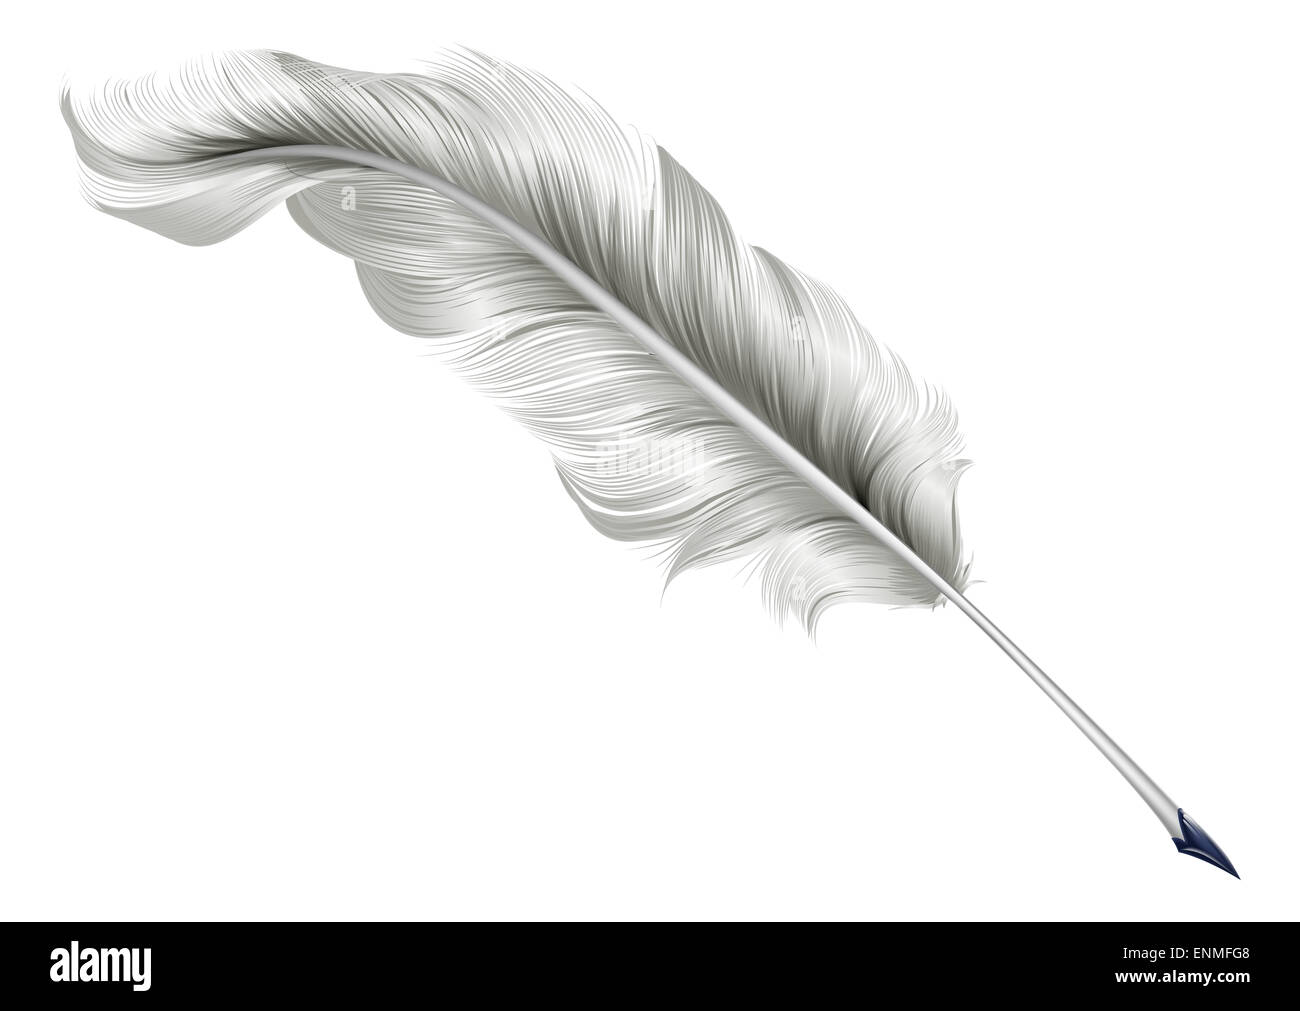 An illustration of a classic antique feather quill pen Stock Photo